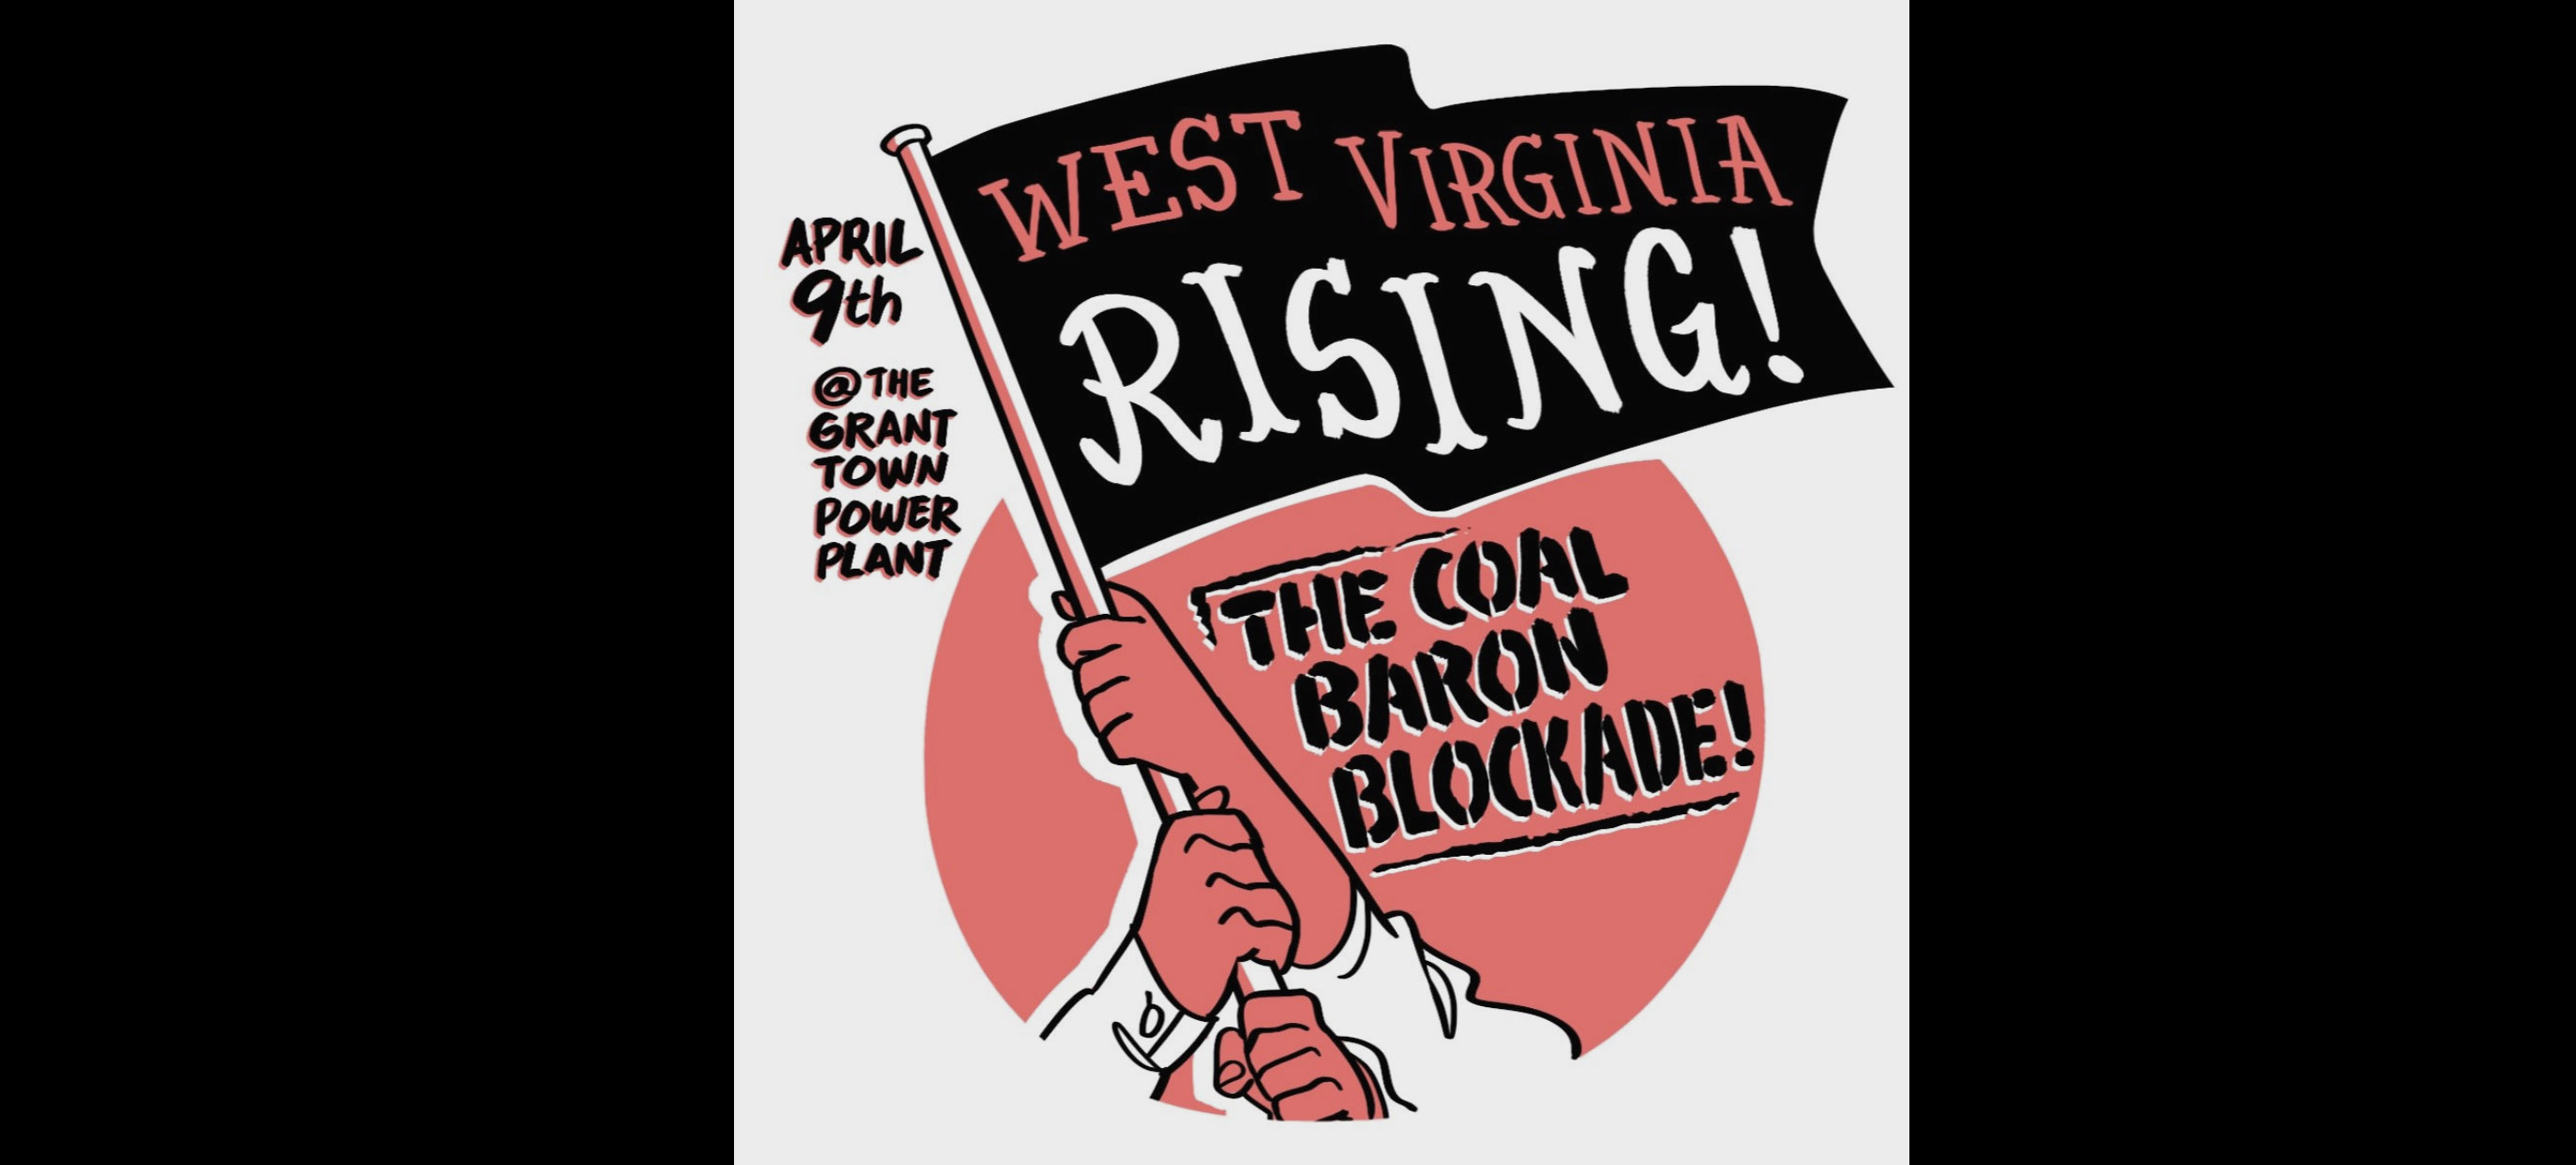 west-virginia-rising-protest-aims-at-coal-and-joe-manchin-crooks-and